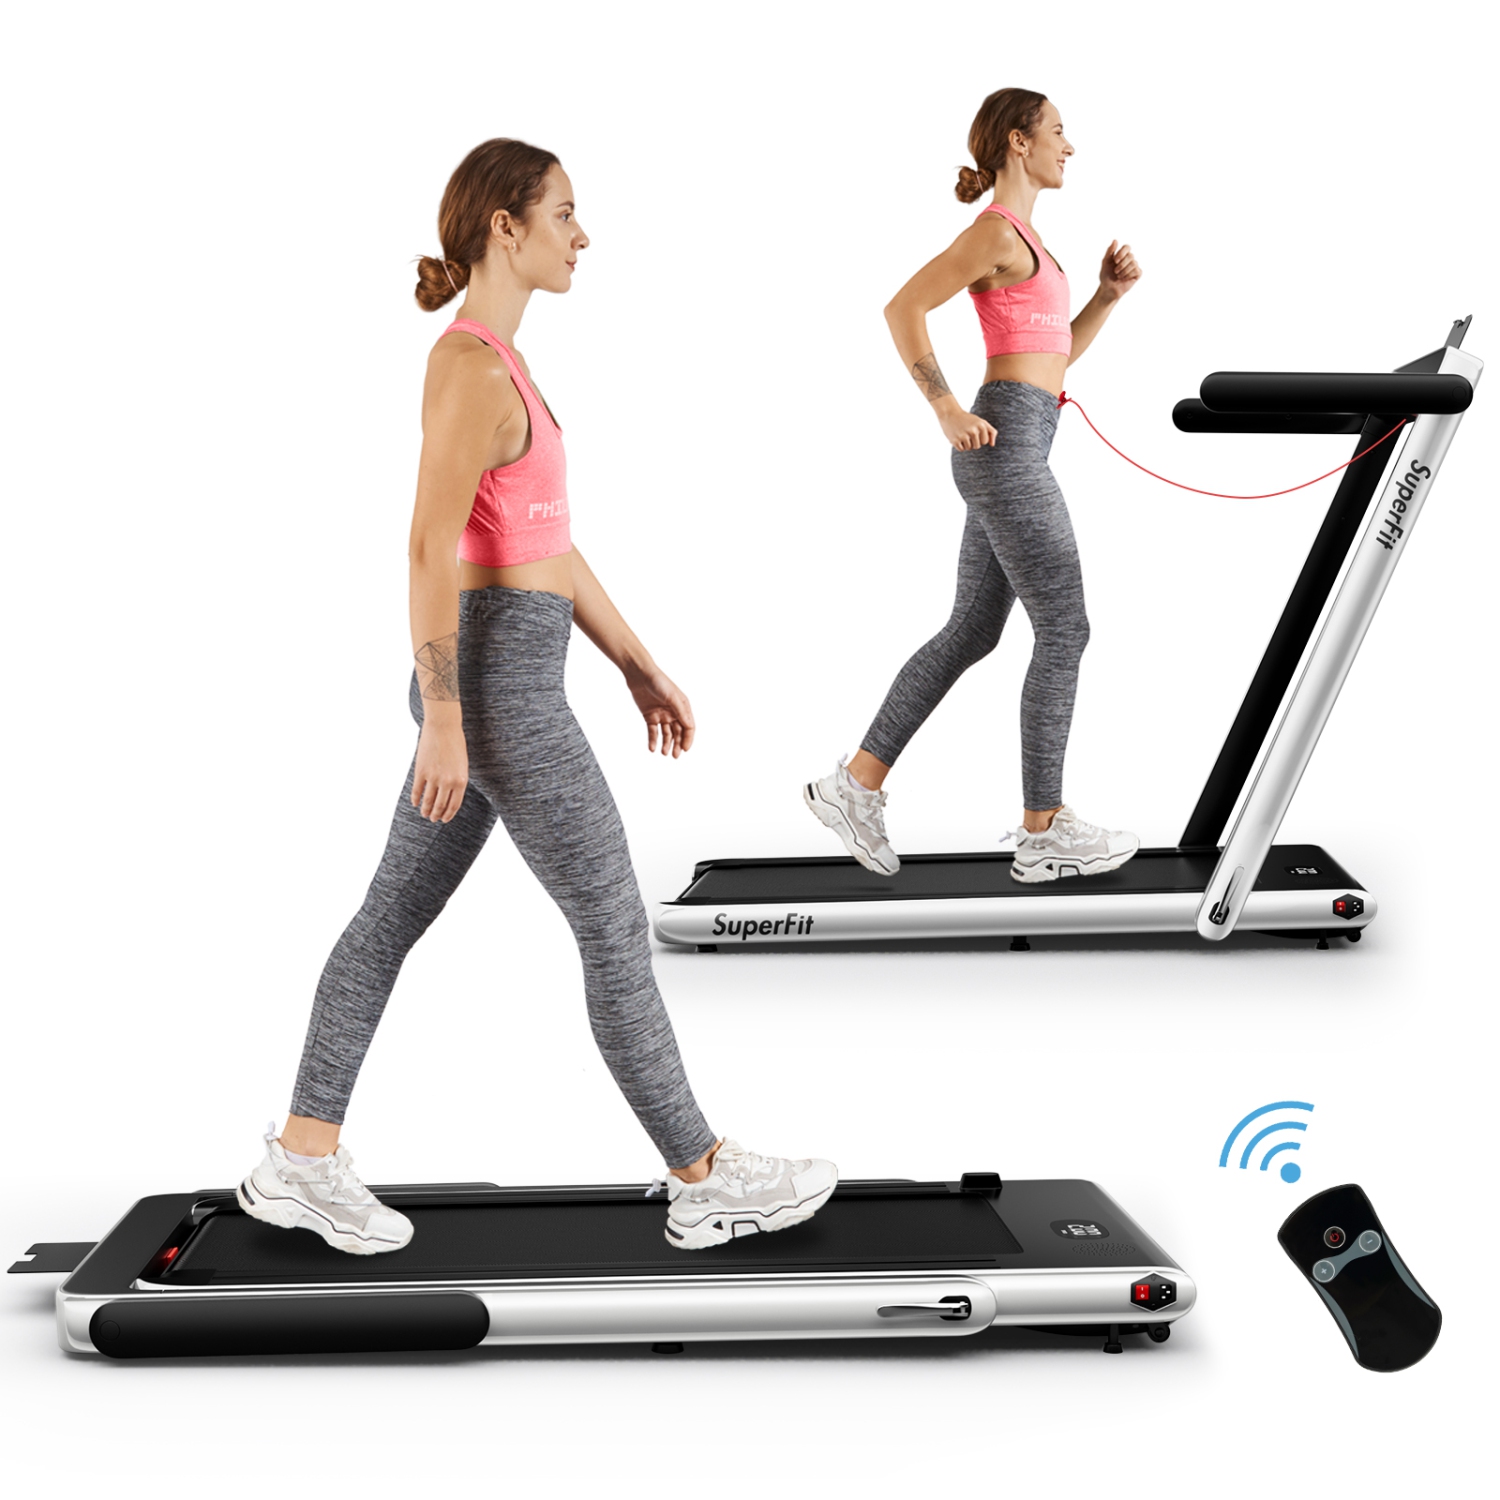 SuperFit 2-in-1 Folding Treadmill with Speaker and Remote Control